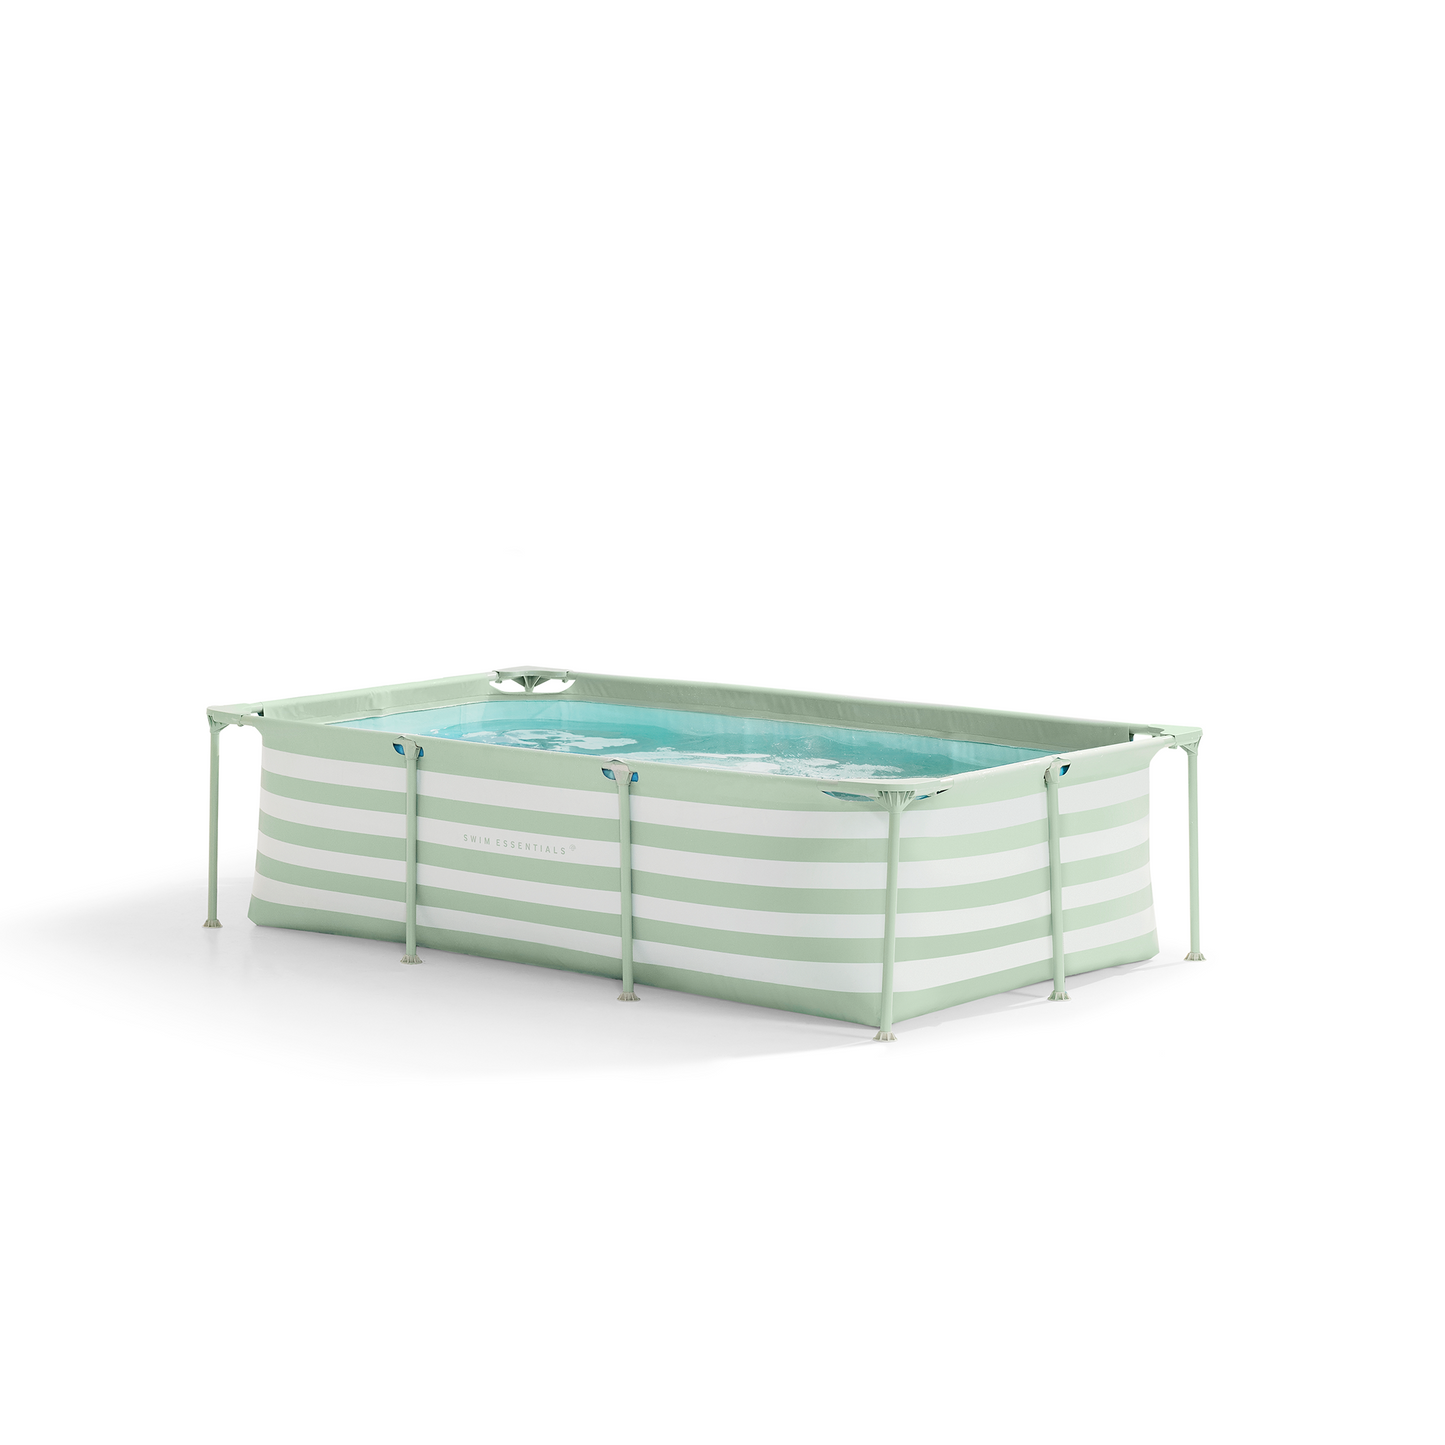 SE Frame pool 260x160x65 cm Green White - with filter pump